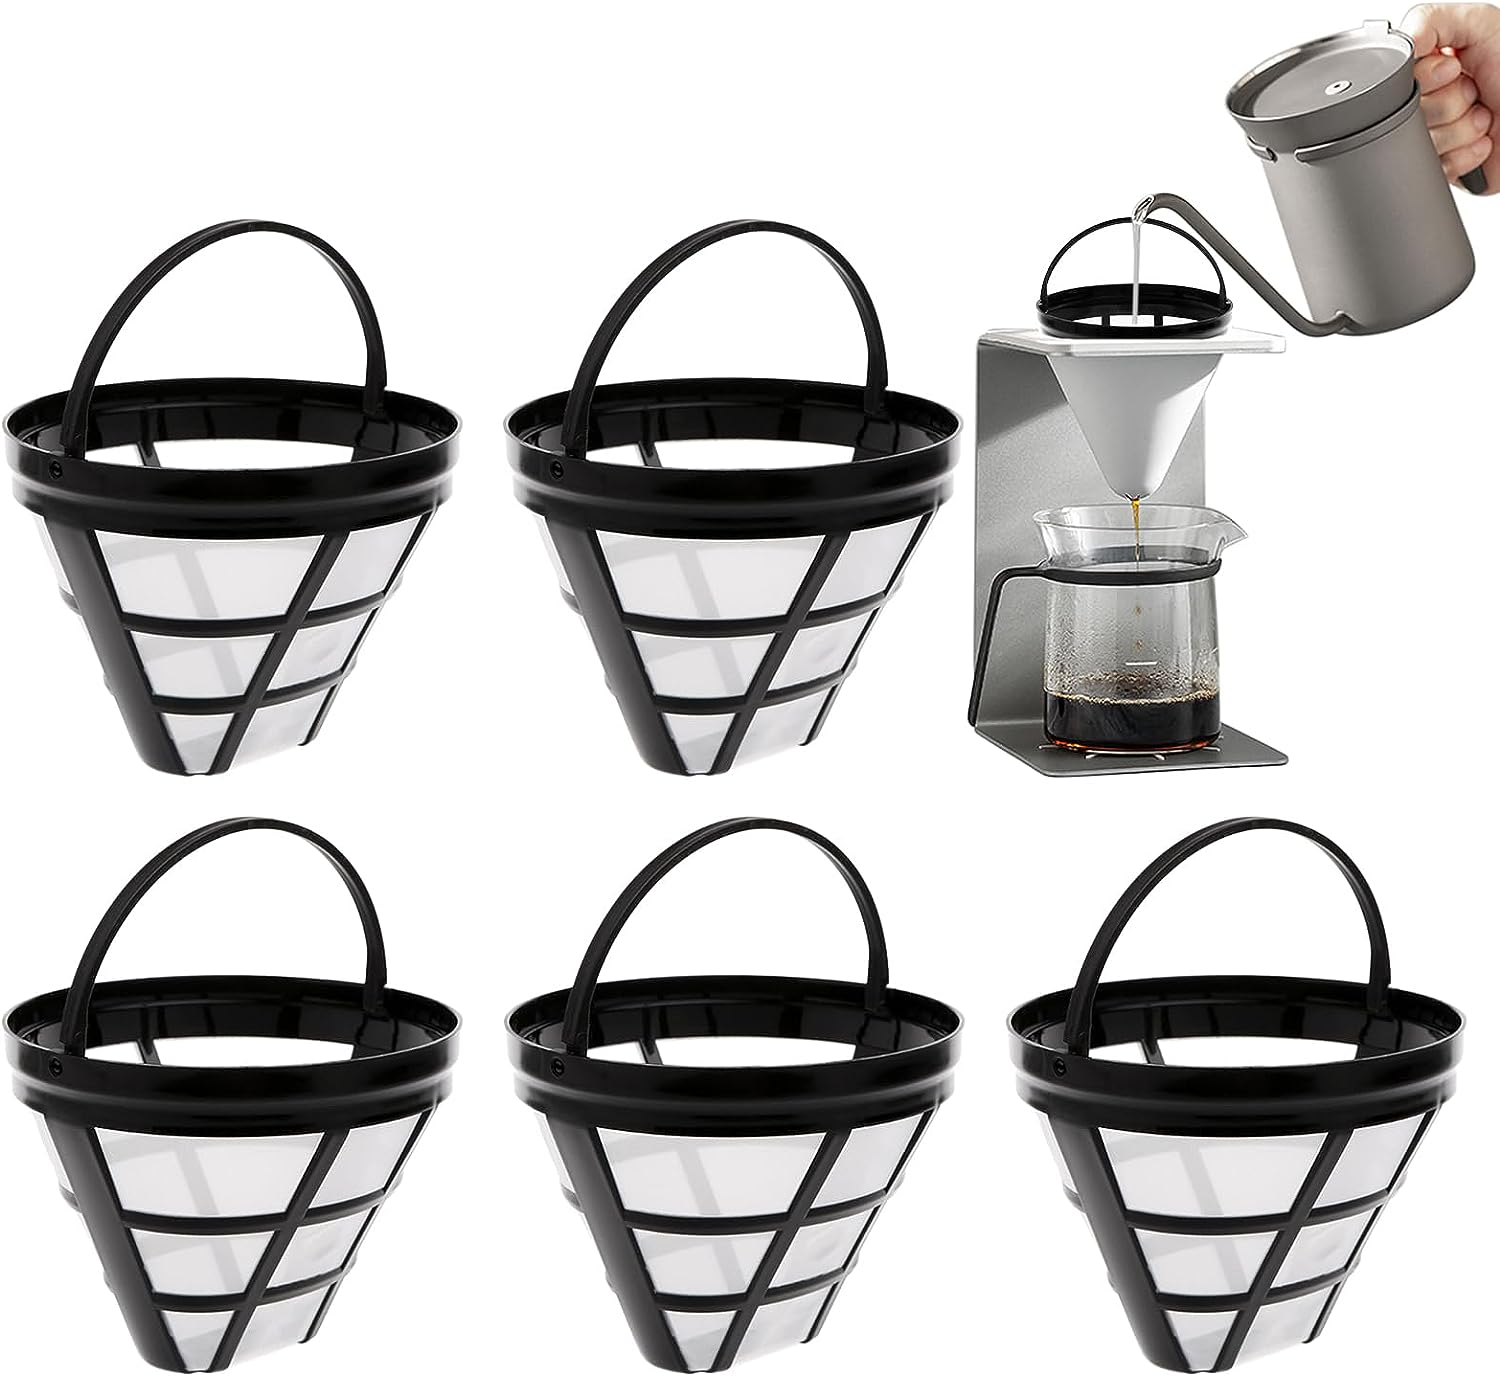 Coffee Filter Size 4 Permanent Coffee Filter: YIDM Pack of 5 Permanent Coffee Filters, Reusable Permanent Filter, Coffee Filter Size 4, Paperless Coffee Filter for Making Manual Coffee